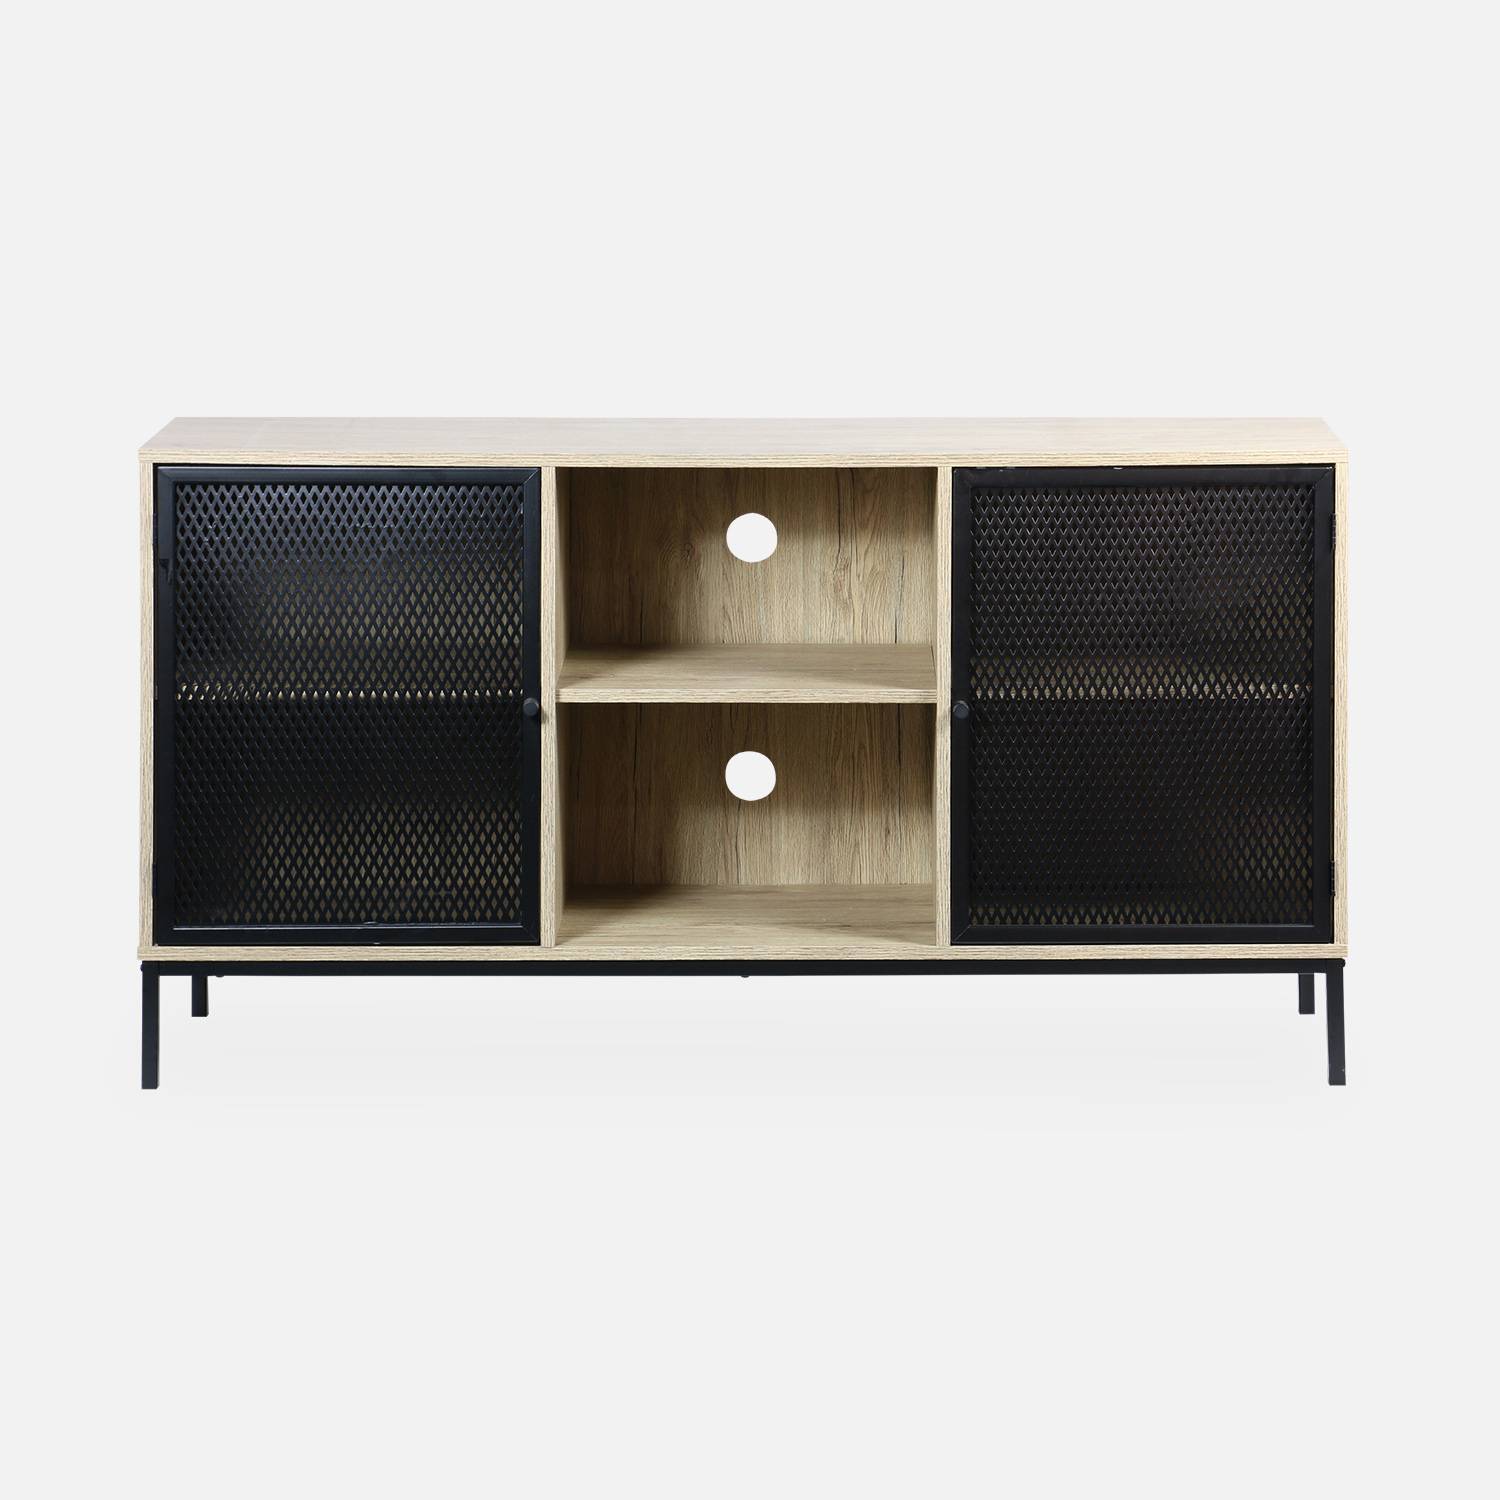 TV stand - metal and wood-effect - 2 doors and 6 compartments - Brooklyn Photo4